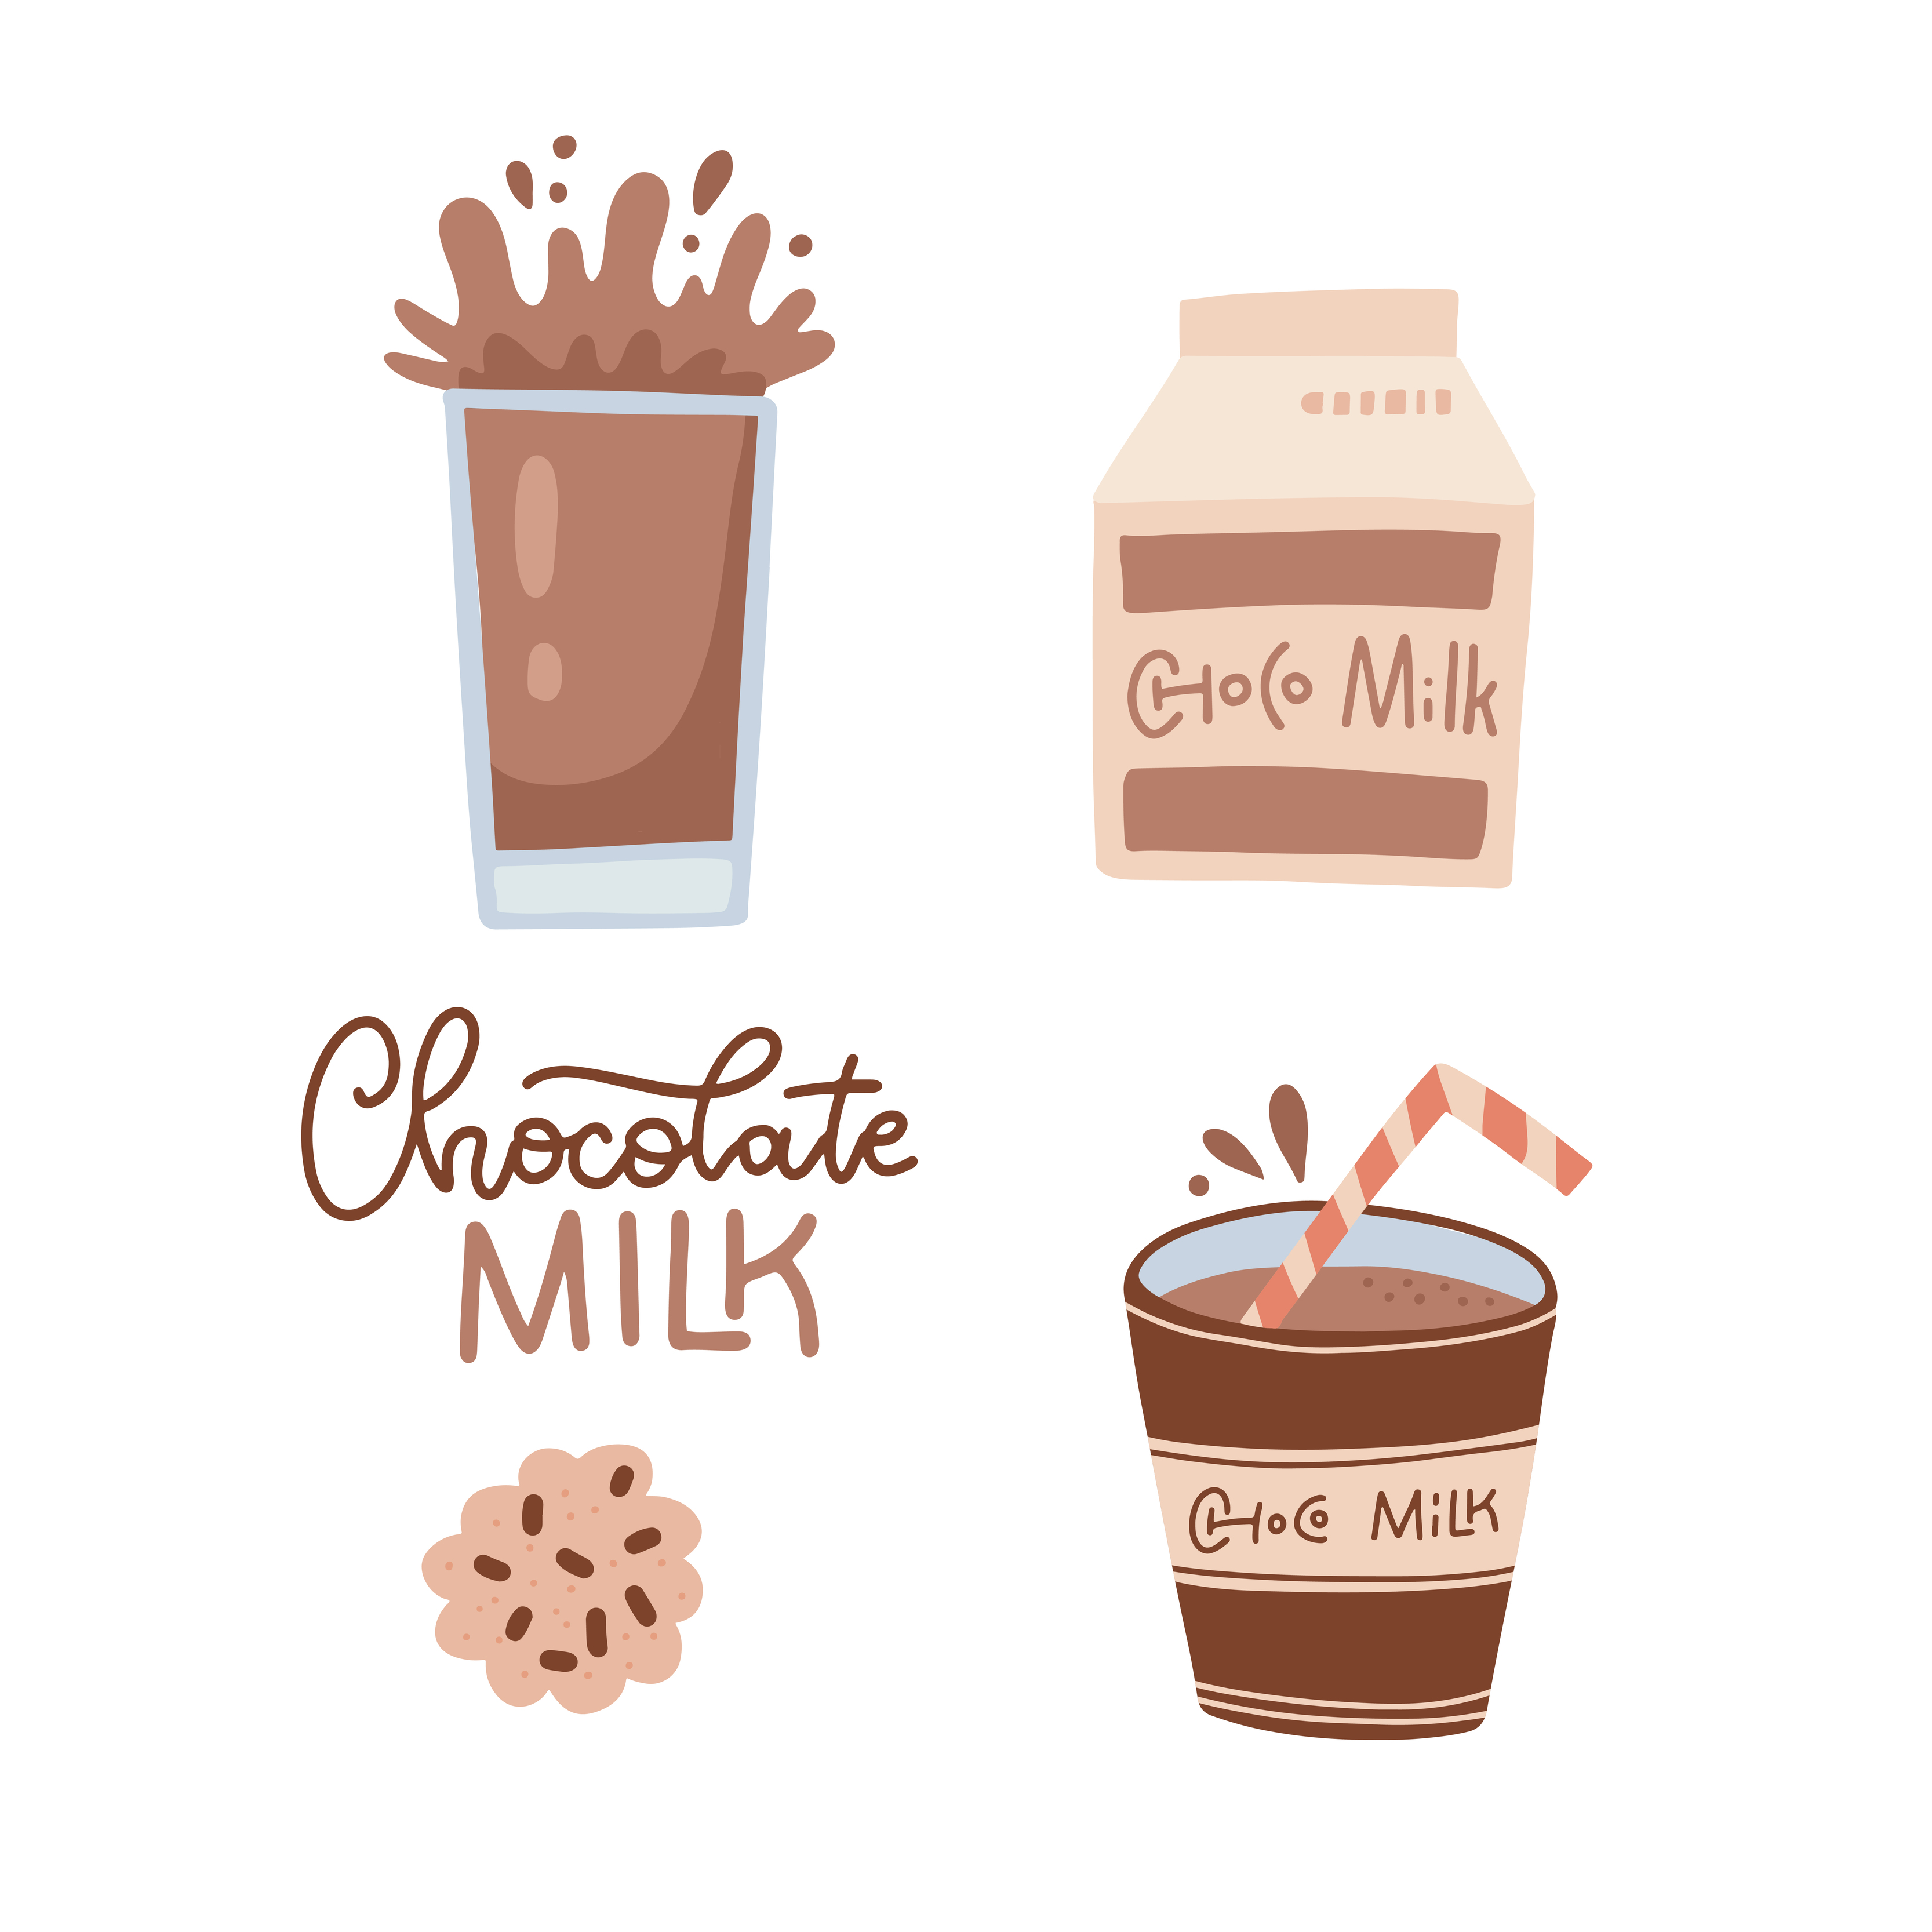 https://static.vecteezy.com/system/resources/previews/006/250/359/original/set-of-chocolate-milk-choco-milky-with-splash-in-full-glass-drink-in-a-cardboard-box-and-a-cardboard-cup-with-a-straw-flat-hand-drawn-illustration-isolated-on-white-vector.jpg